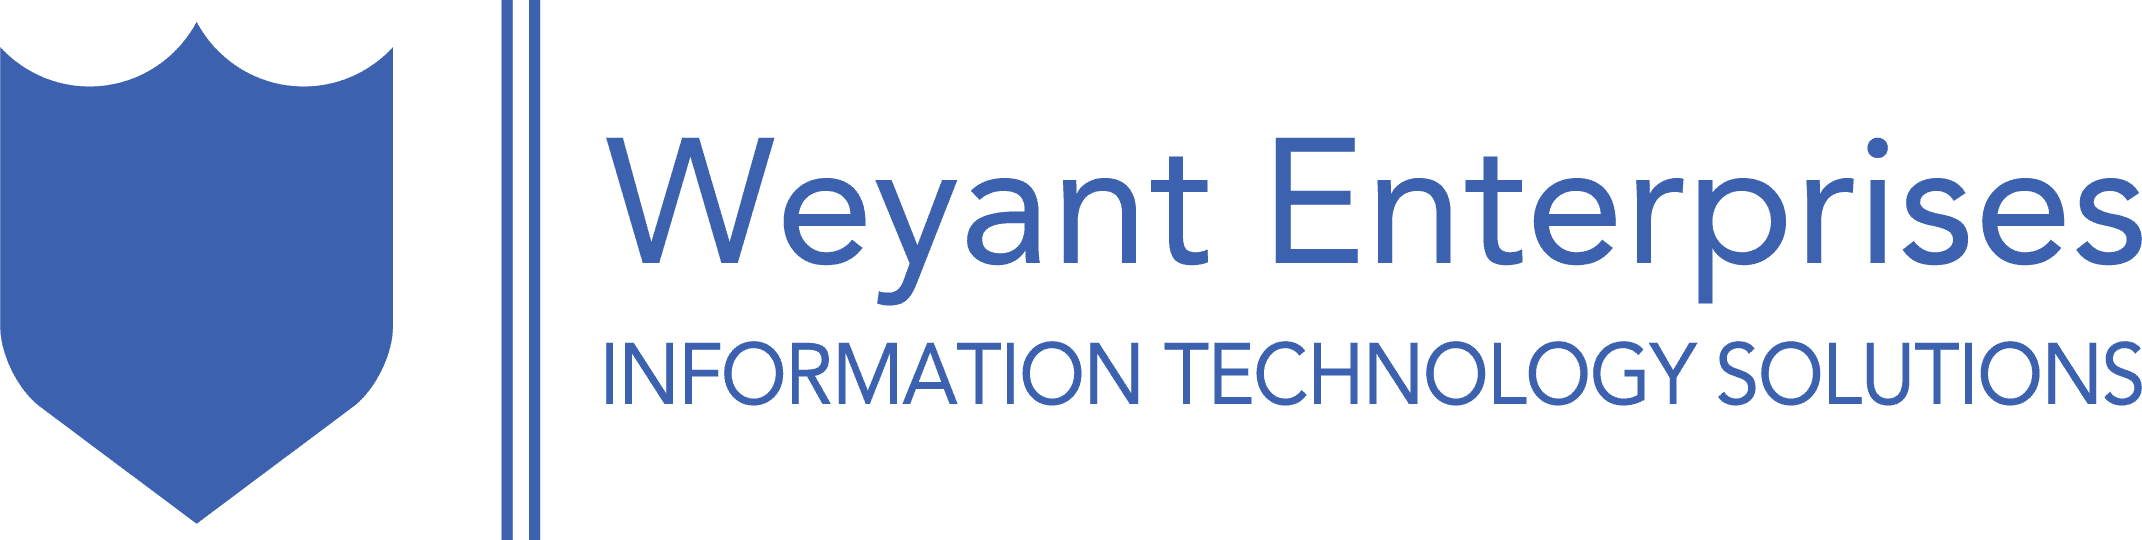 Managed IT Services in Oxnard, Ventura and Camarillo provided by Weyant Enterprises